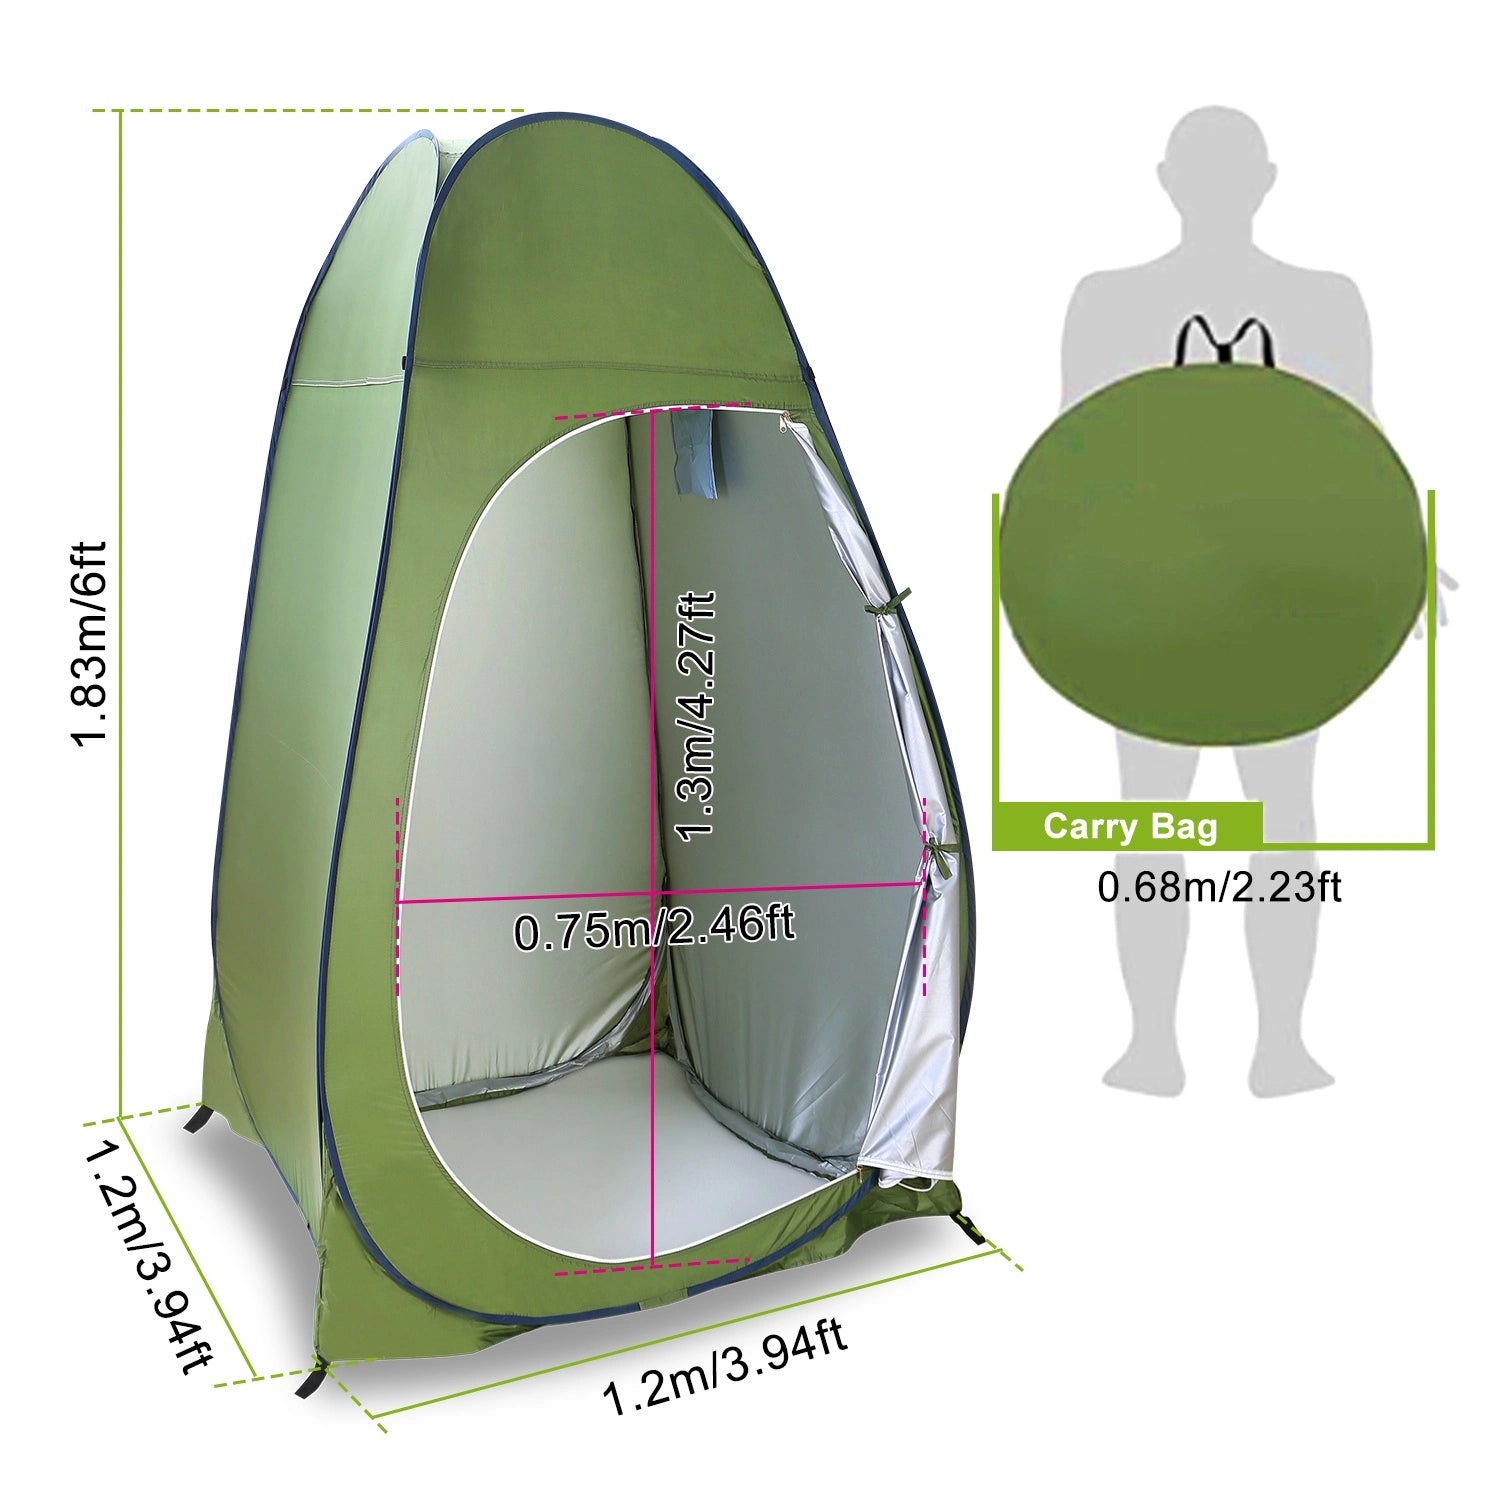 Camping Toilet Pop Up Changing Tent - Outdoor Large Travel Portable Shower 1-Person Privacy Tent for Toilet